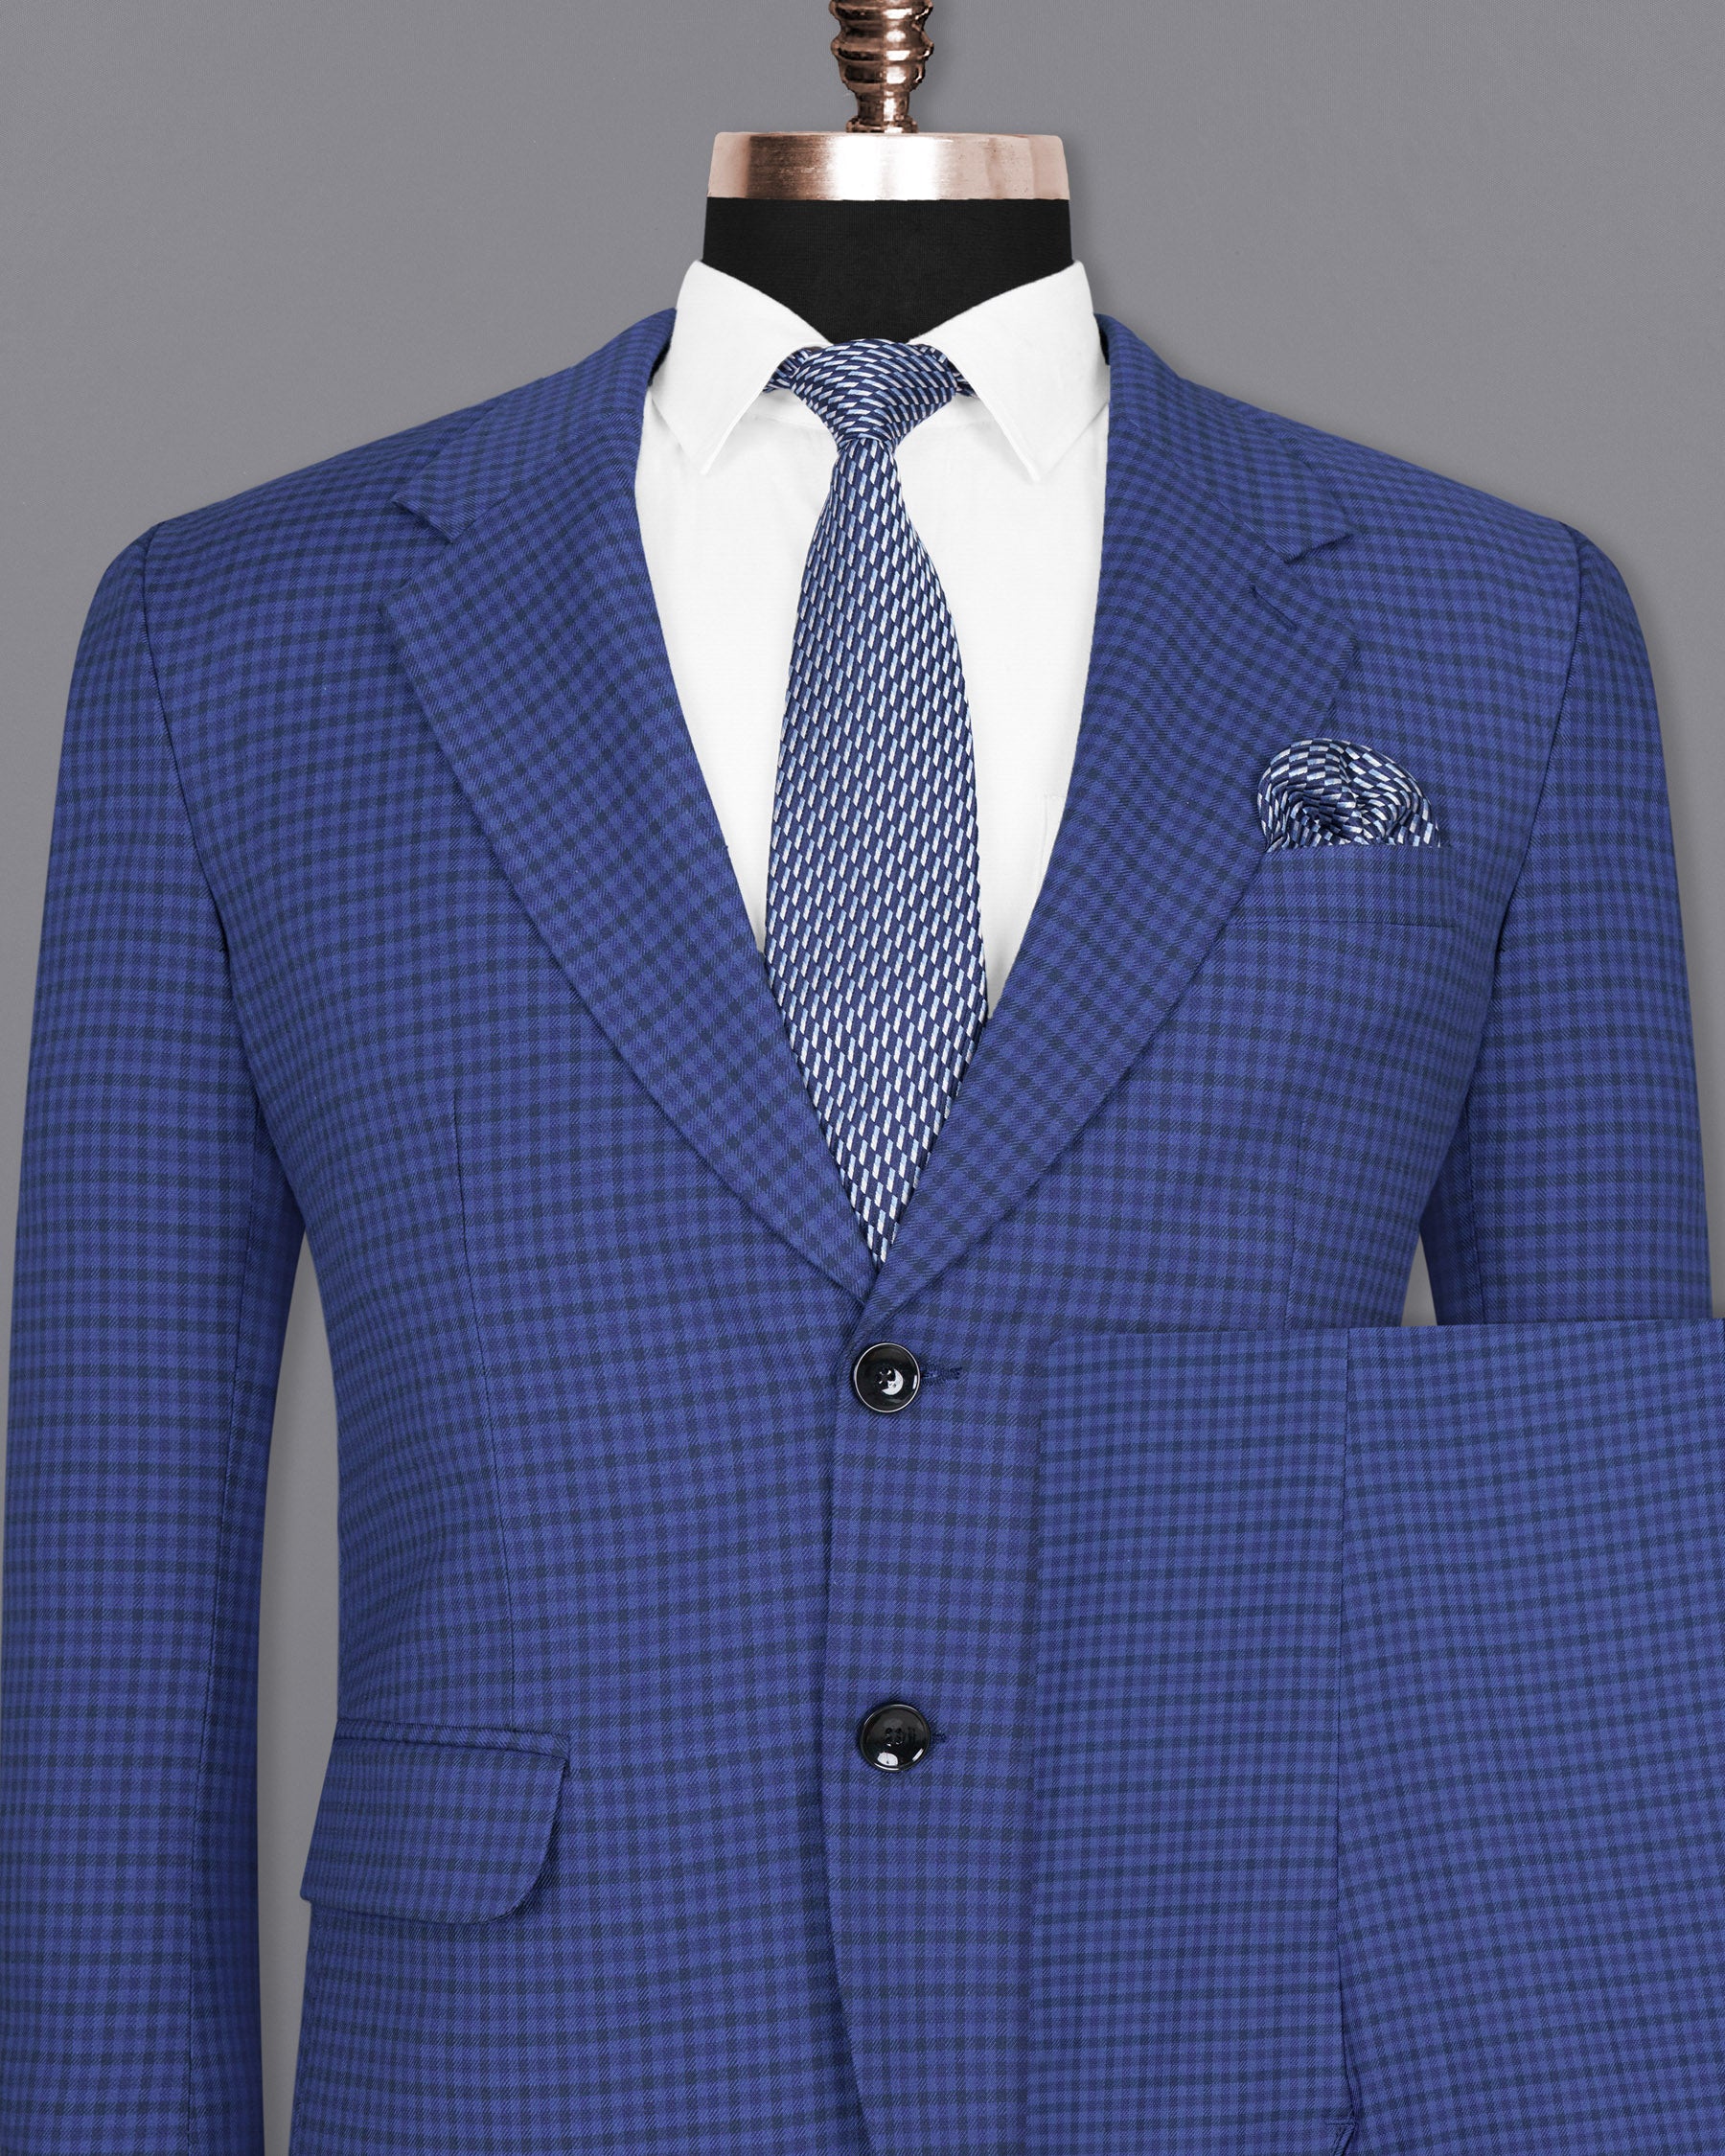 East Bay STue Gingham Woolrich Suit ST1430-SB-36,ST1430-SB-38,ST1430-SB-40,ST1430-SB-42,ST1430-SB-44,ST1430-SB-46,ST1430-SB-48,ST1430-SB-50,ST1430-SB-52,ST1430-SB-54,ST1430-SB-56,ST1430-SB-58,ST1430-SB-60